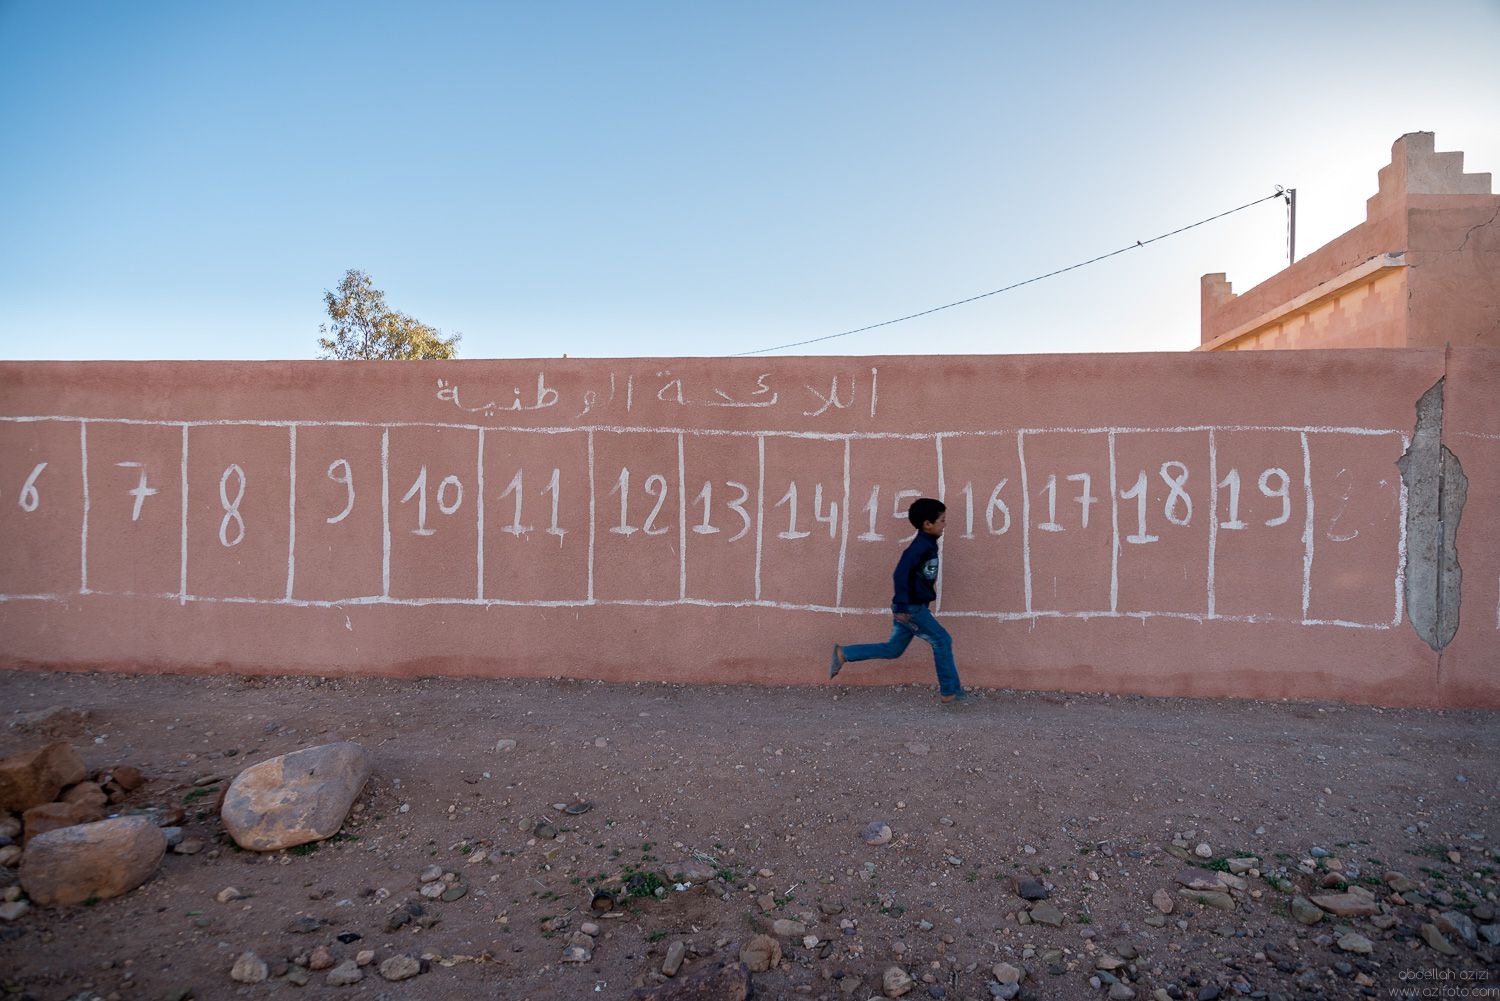 Mohamed at School - Arhal project